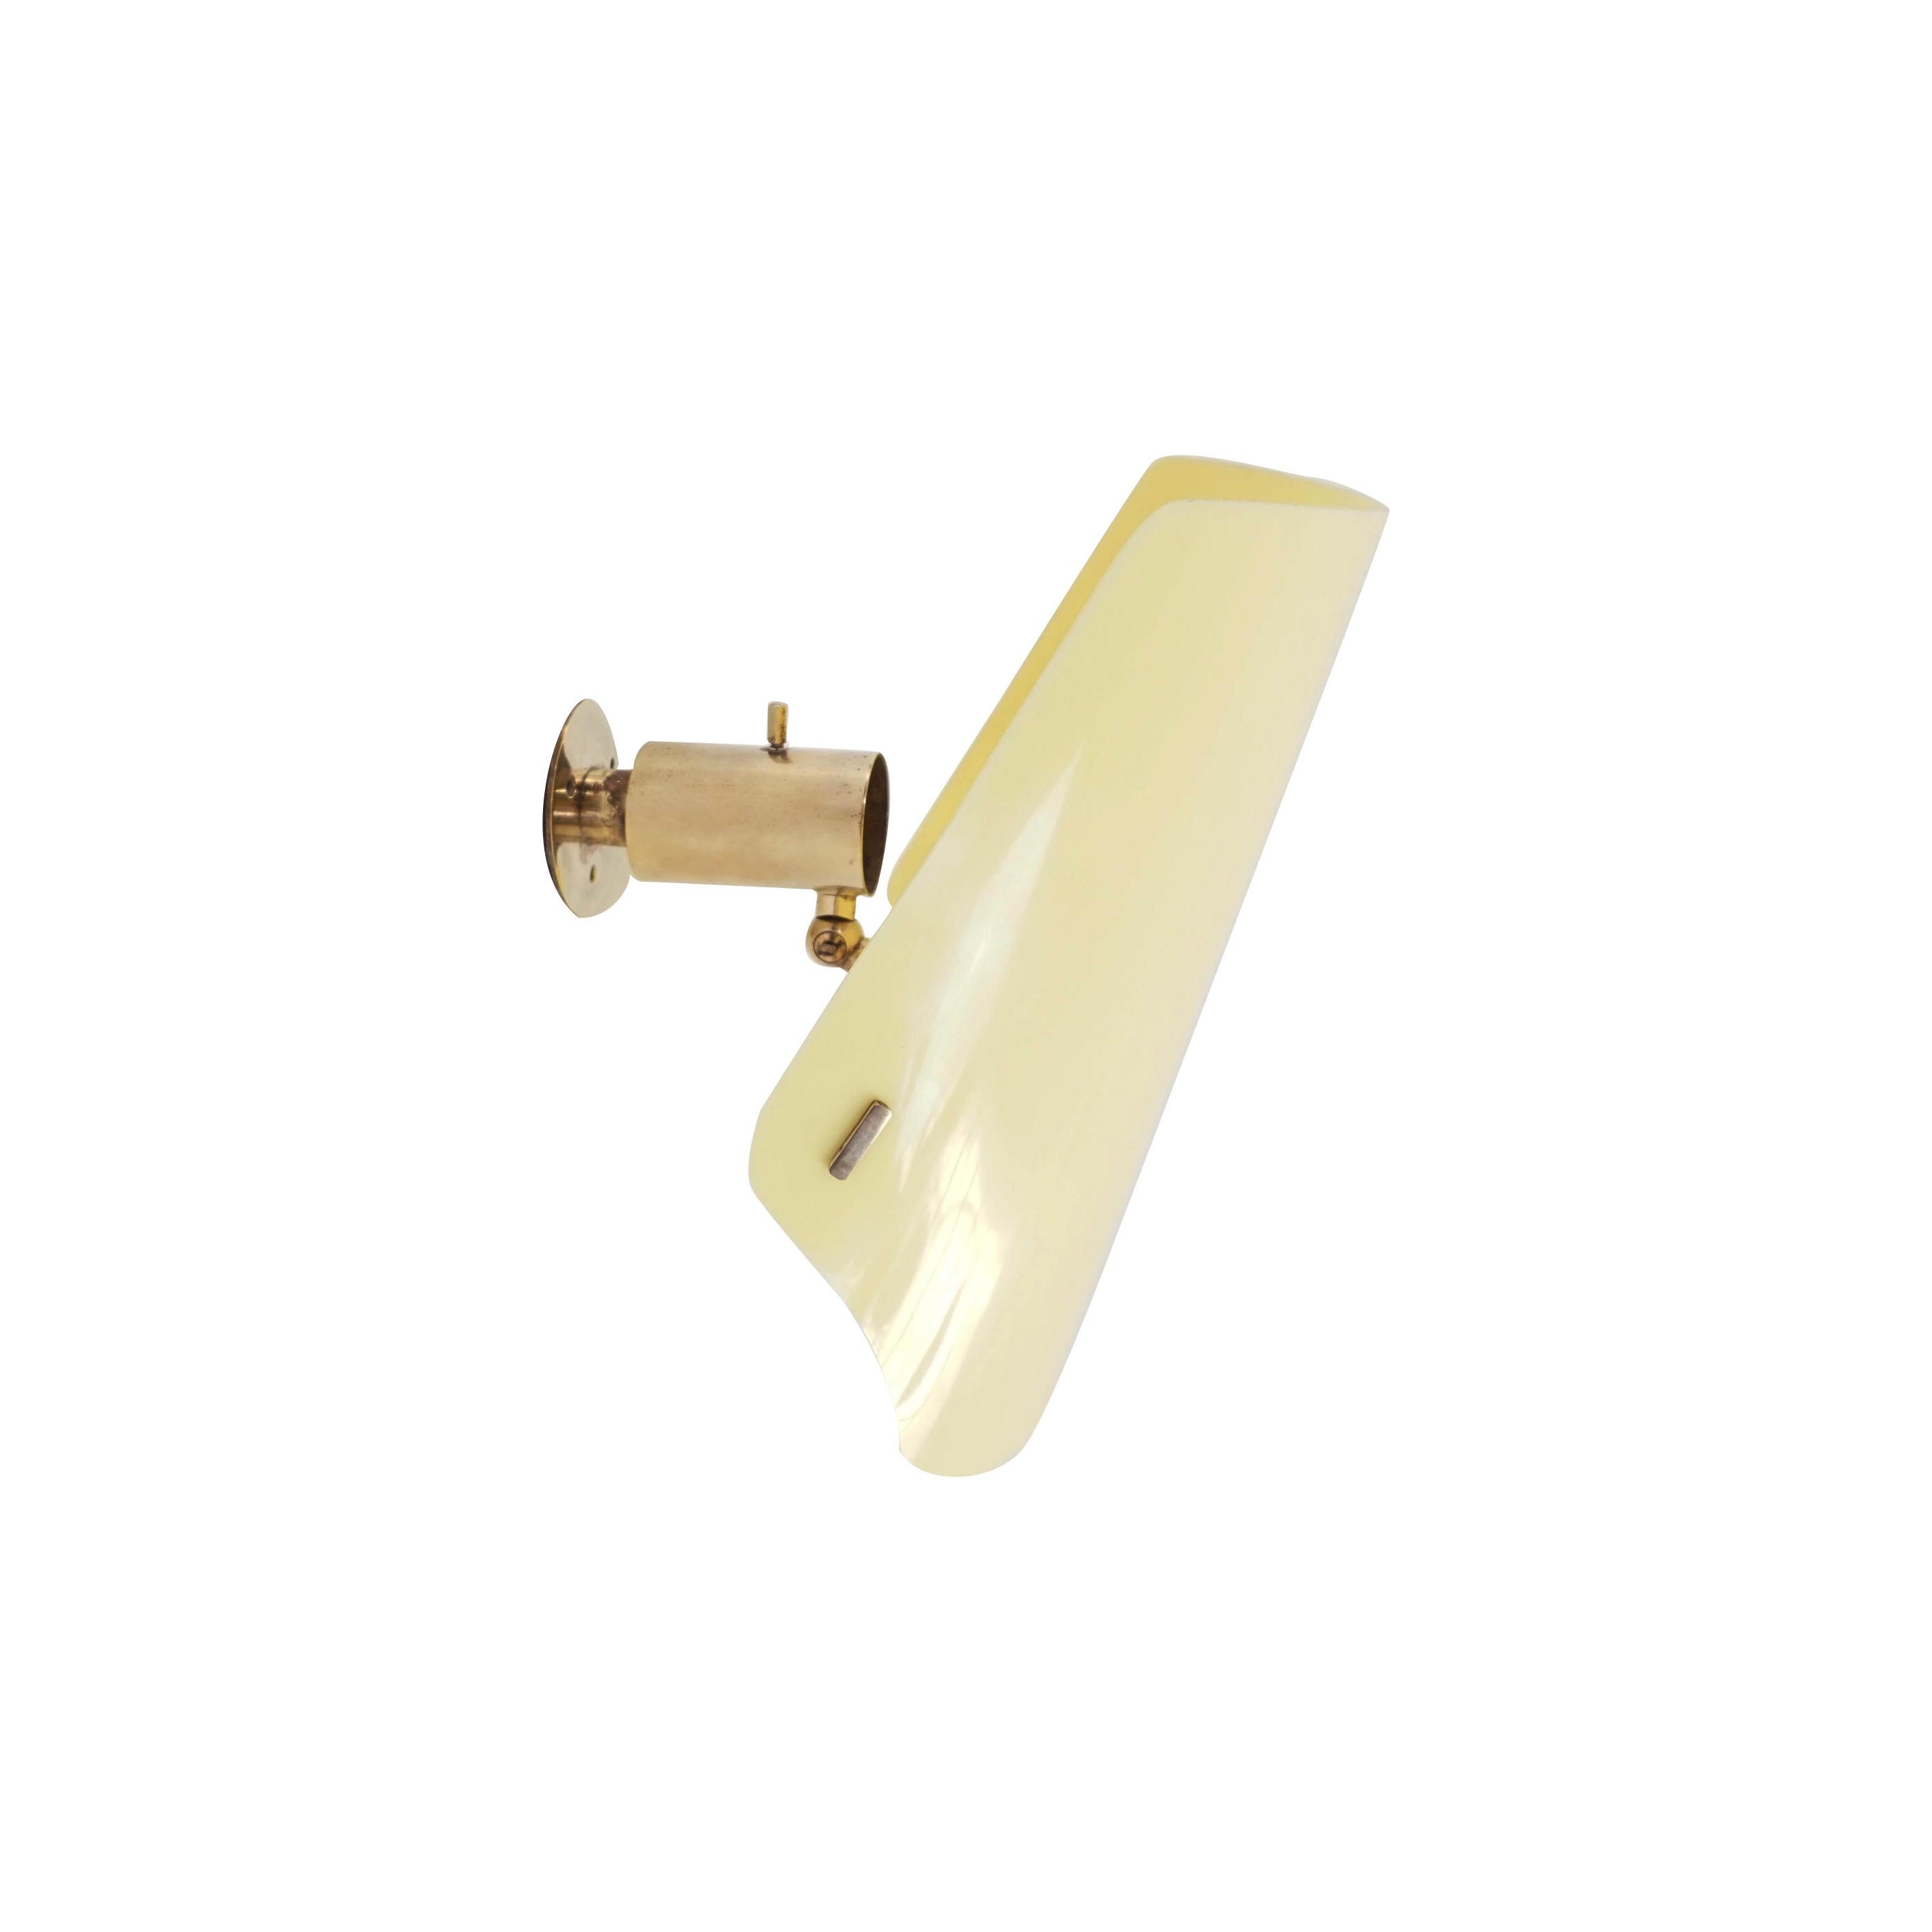 Gino Sarfatti, 1951 Rare Adjustable Yellow Sconce Mod. 184 by Arteluce, Italy For Sale